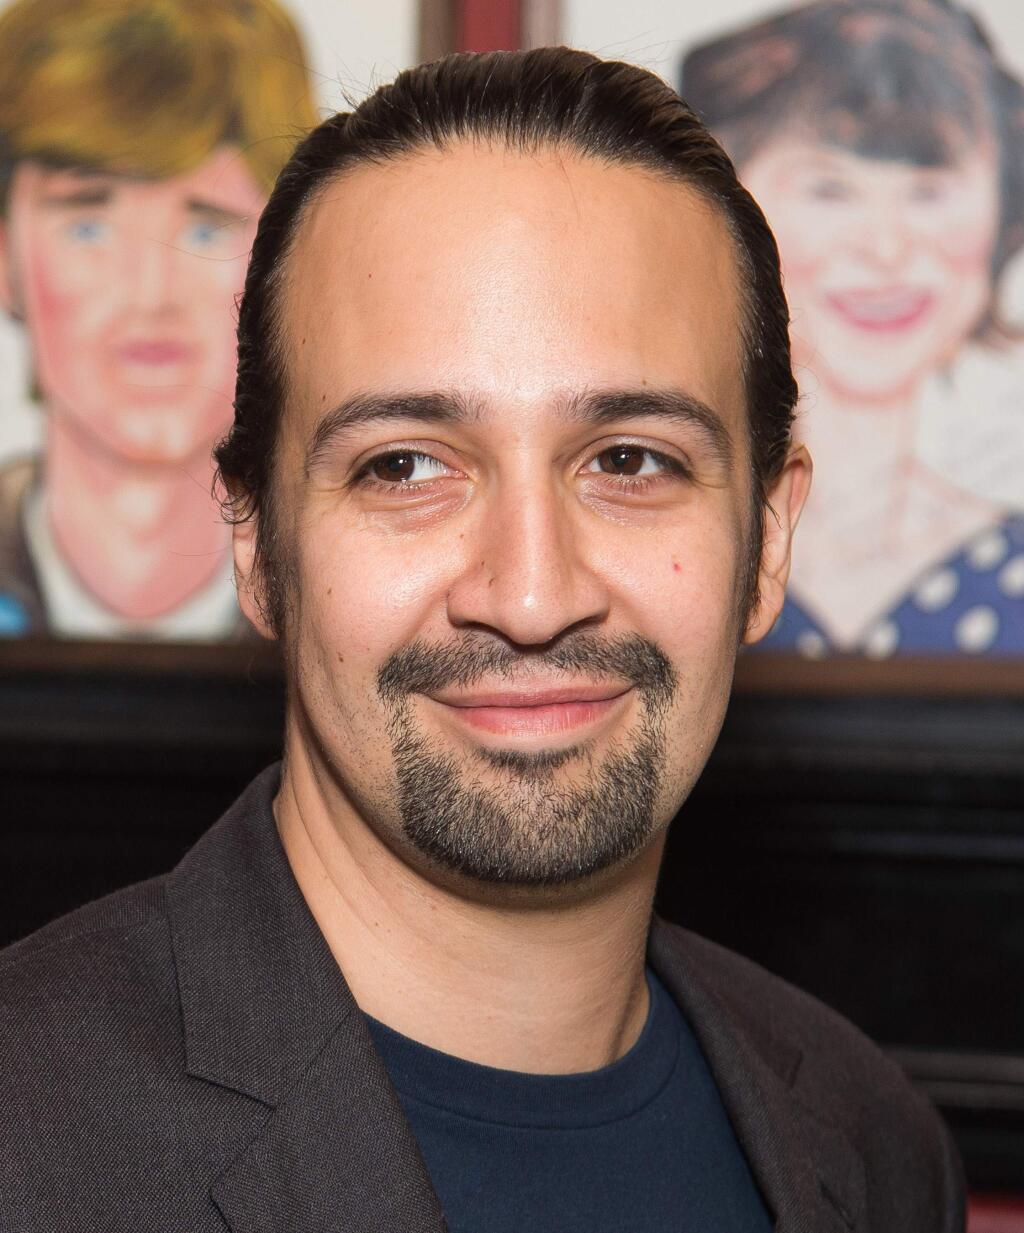 FILE - In this May 24, 2016 file photo, Lin-Manuel Miranda attends his Sardi's caricature unveiling at Sardi's restaurant in New York. Miranda will star with Emily Blunt in 'Mary Poppins Returns,' a sequel to the 1964 classic, which will be released on Dec. 25, 2018. (Photo by Charles Sykes/Invision/AP, File)